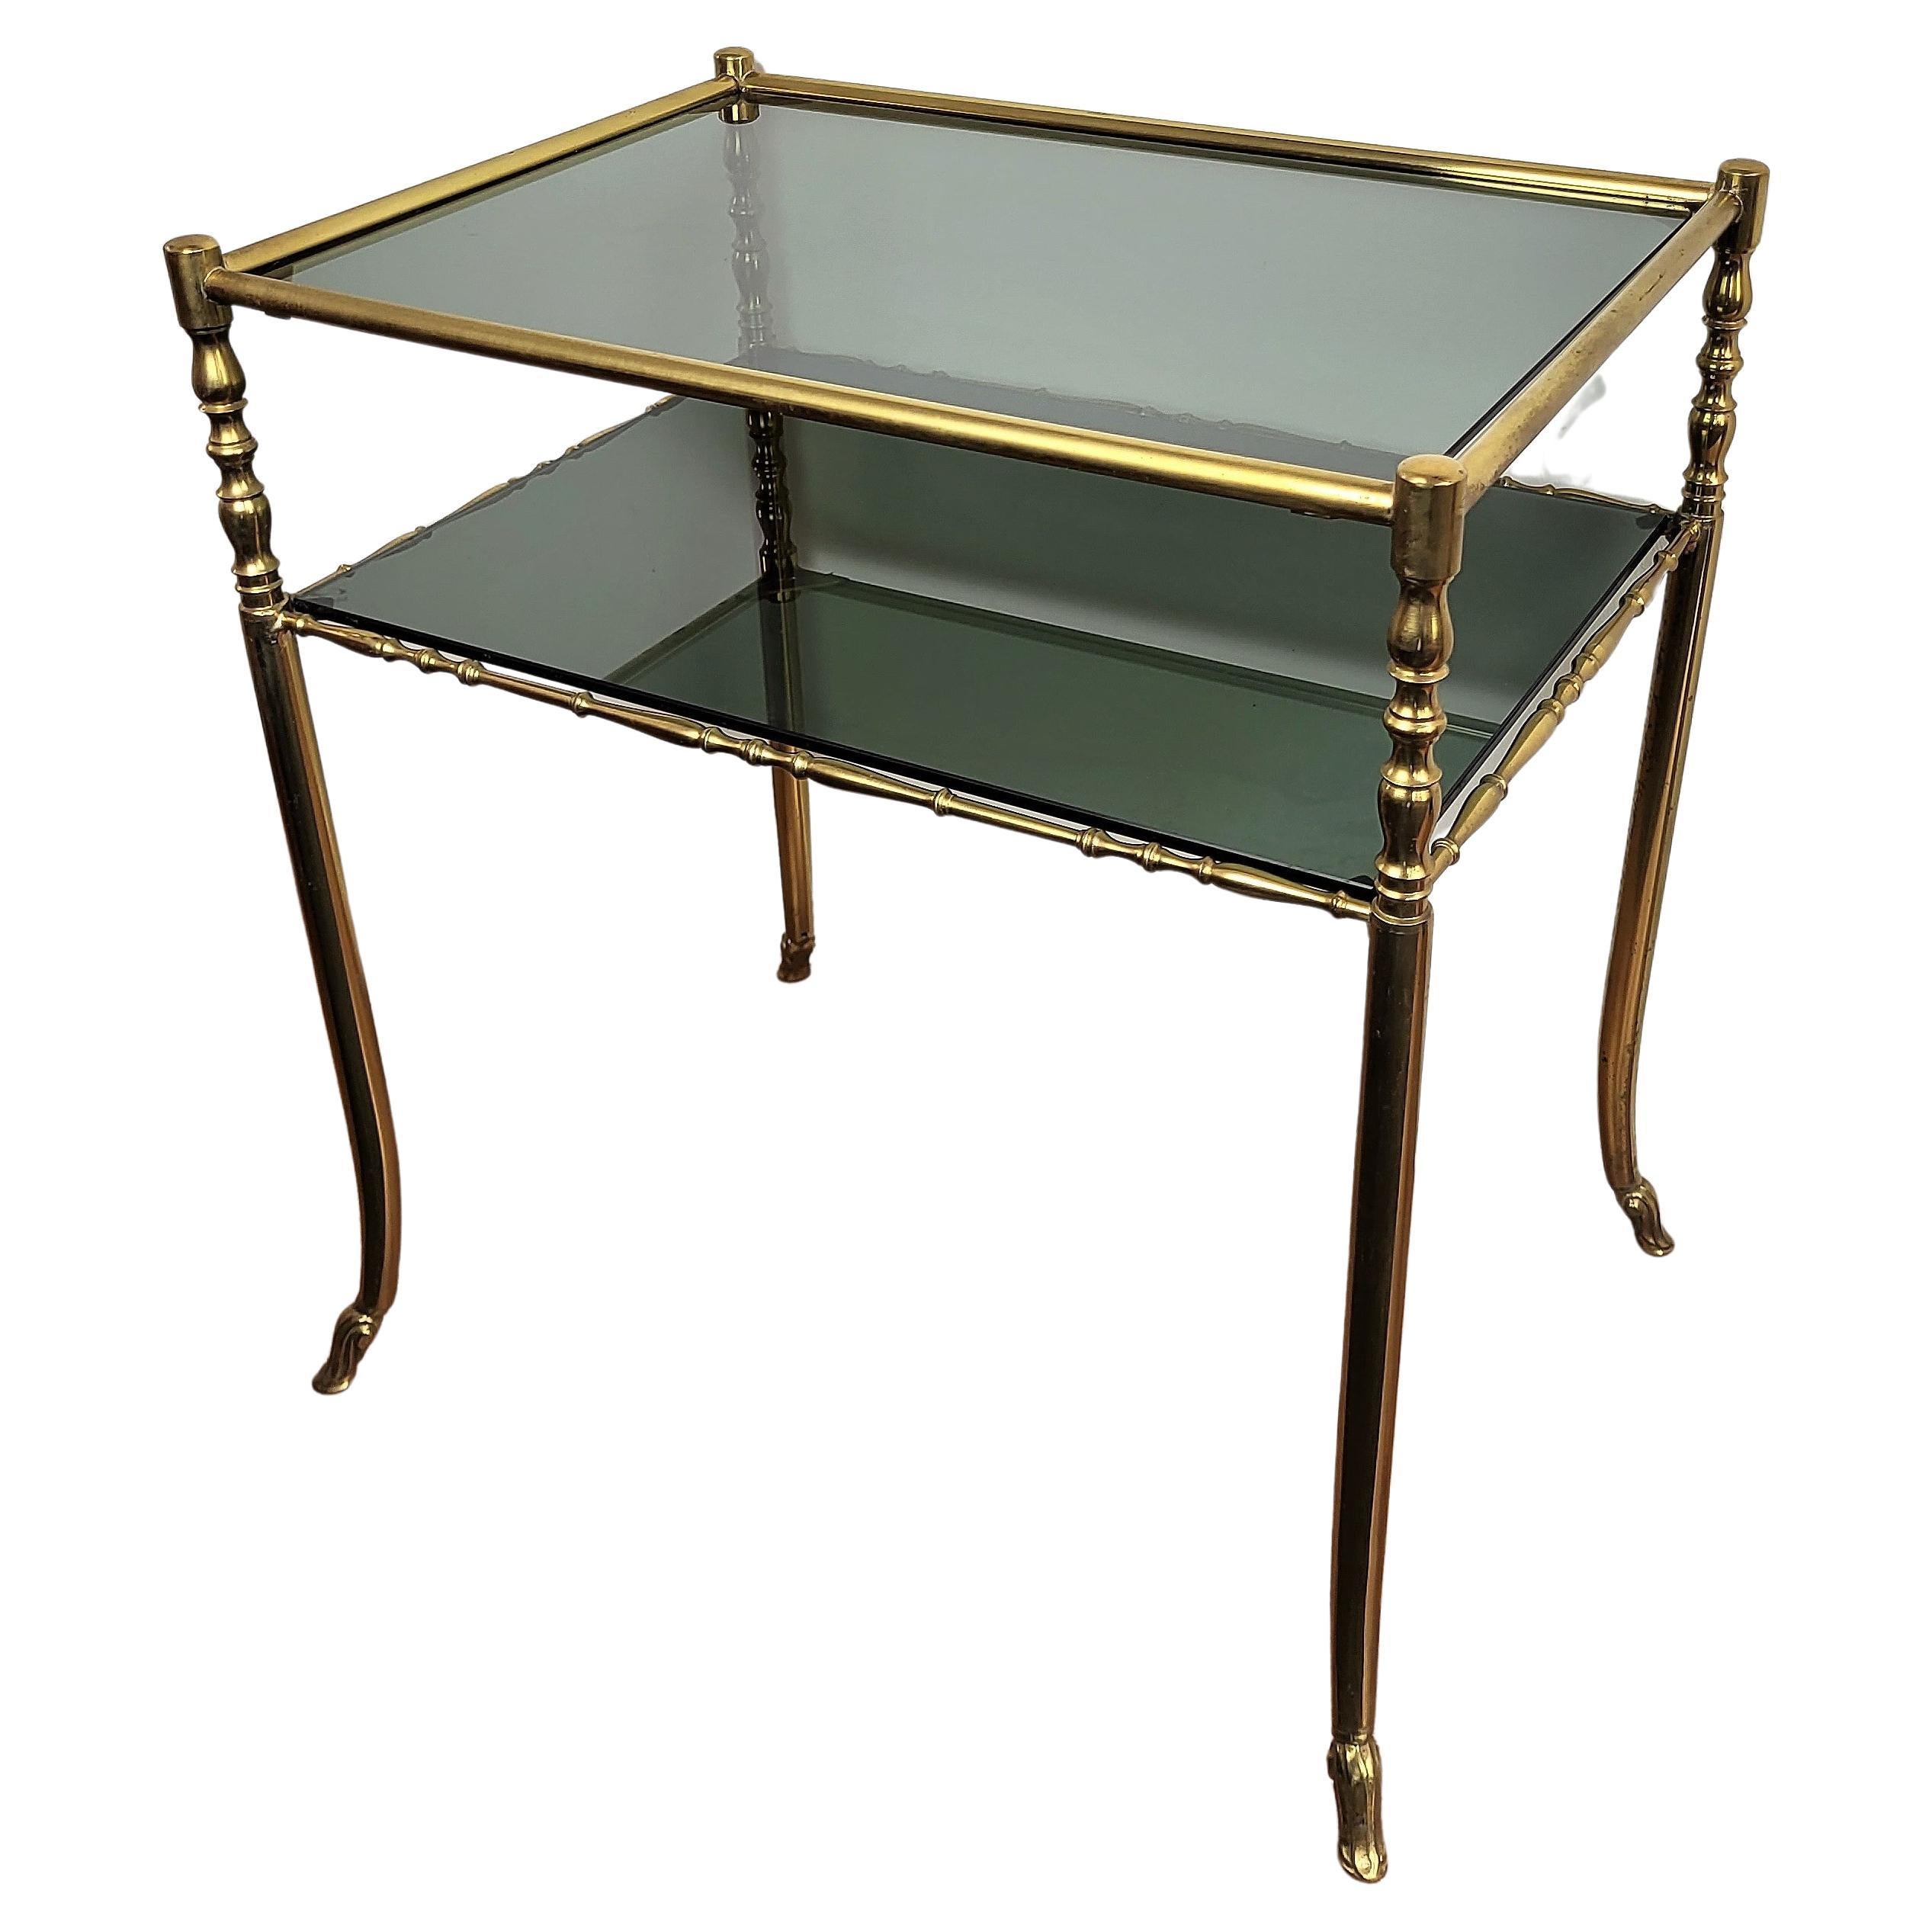 1980s Hollywood Regency Mid-Century Modern Brass and Smoked Glass Console Table For Sale